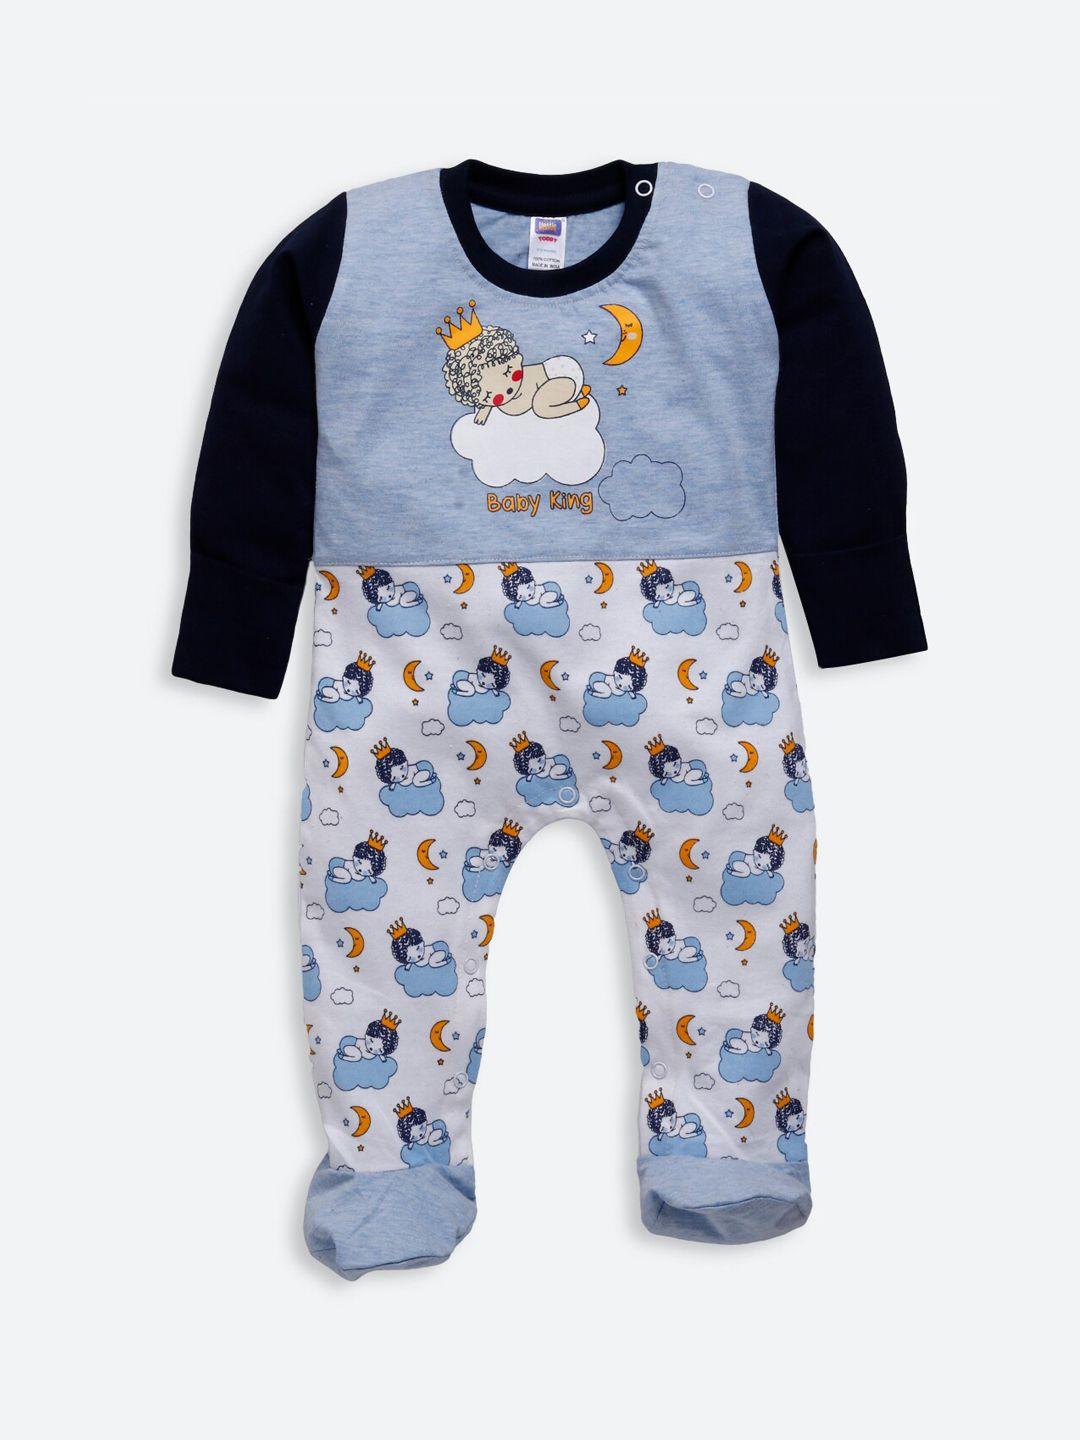 nottie planet kids blue & white printed cotton rompers